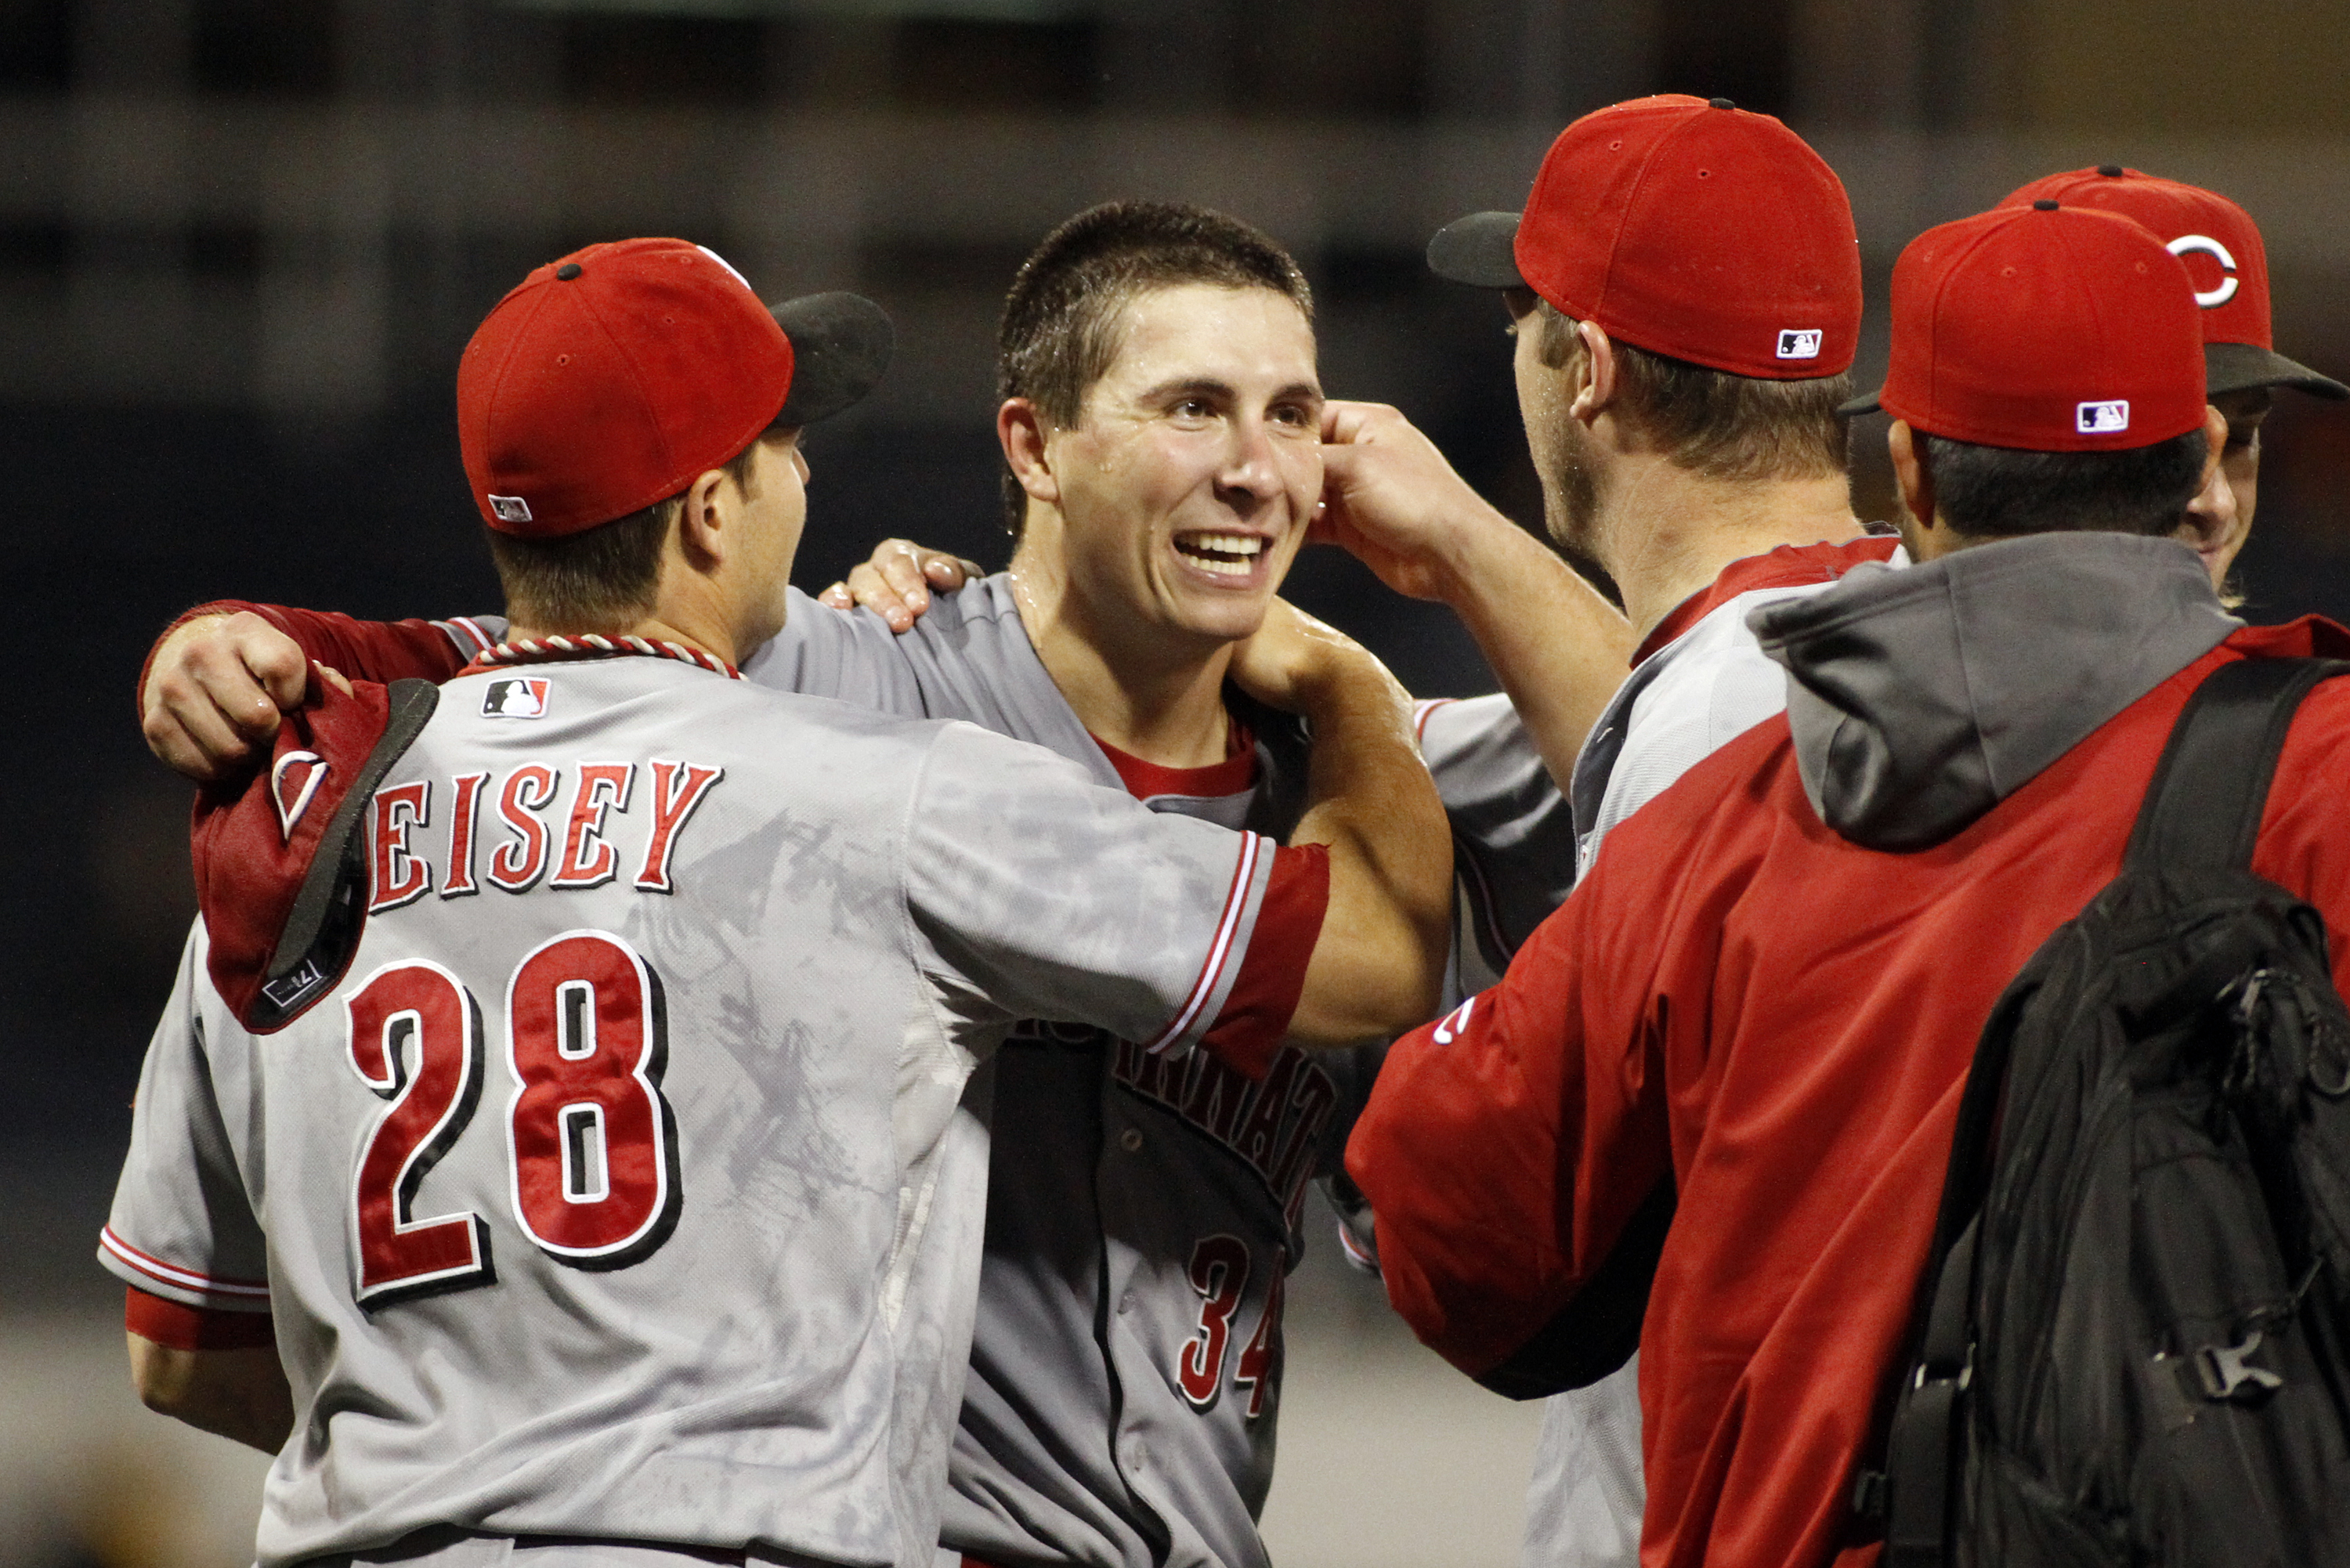 Homer Bailey of the Cincinnati Reds celebrates his no-hitter with teammates against the Pittsburgh Pirates on September 28, 2012 at PNC Park in Pittsburgh, Pa.